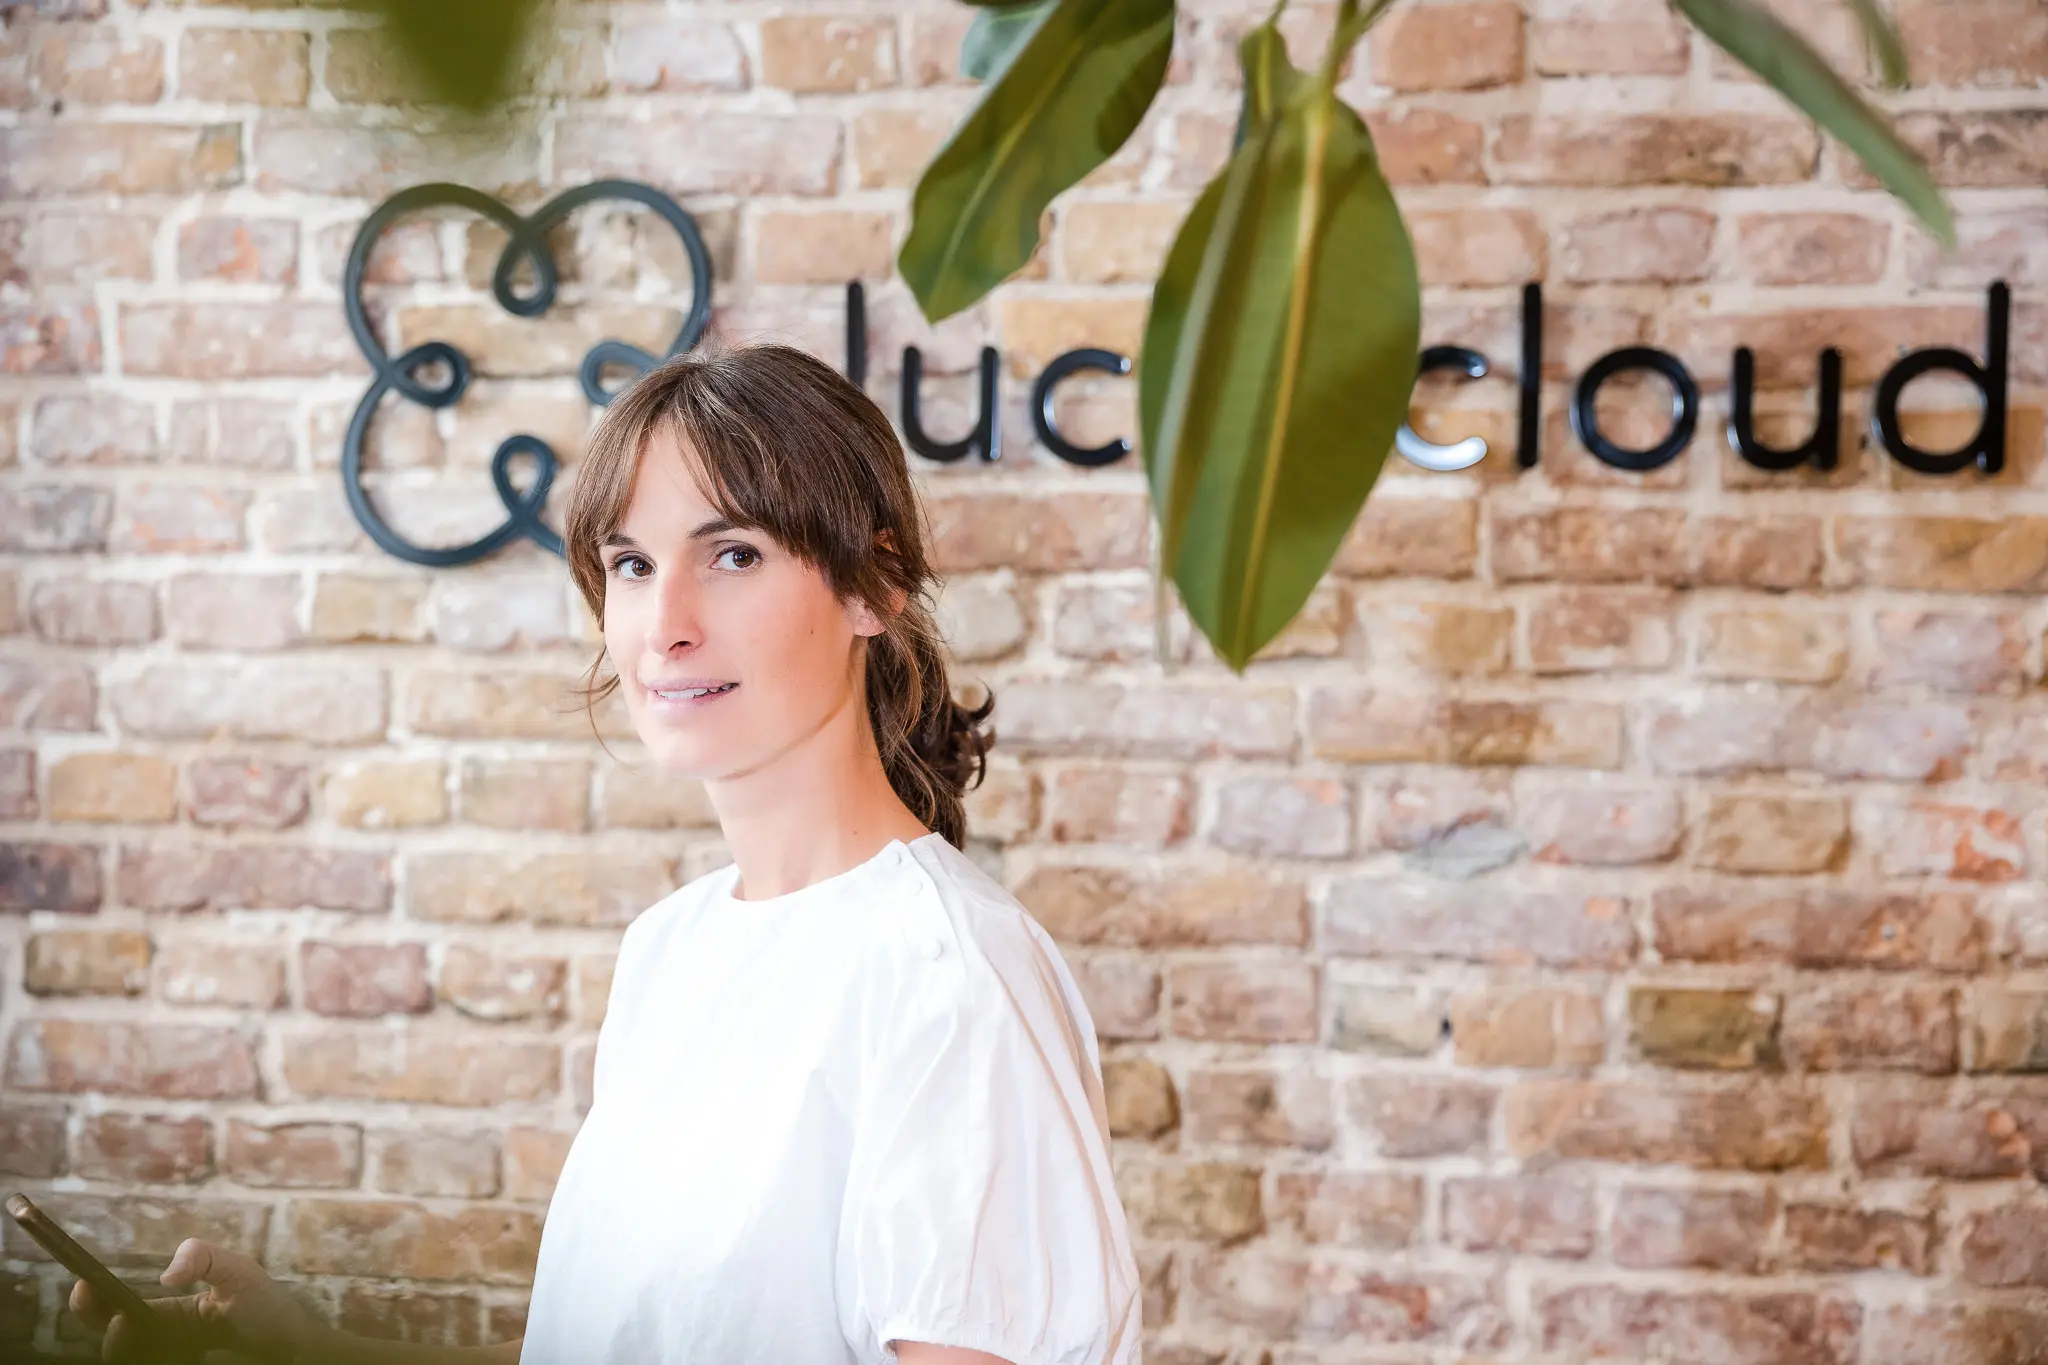 A woman smiles into the camera, the logo of luckycloud can be seen on the stone wall behind her.